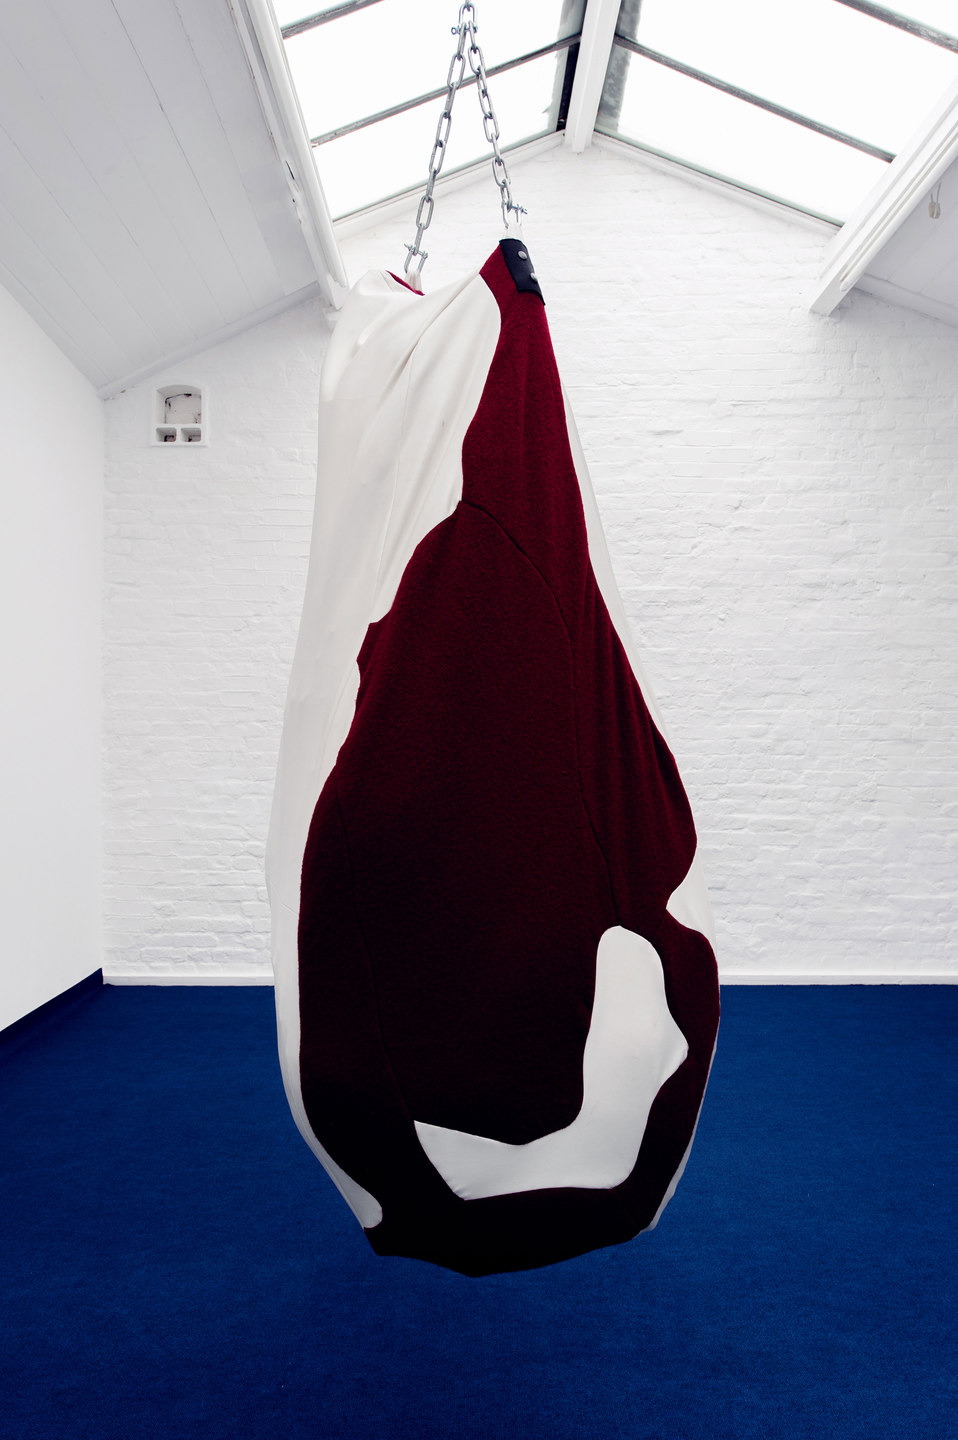 Florian Auer, Not Yet Titled (Punching Bag), 2013, leather cloth, textile, chain (155 x 70 x 35 cm)